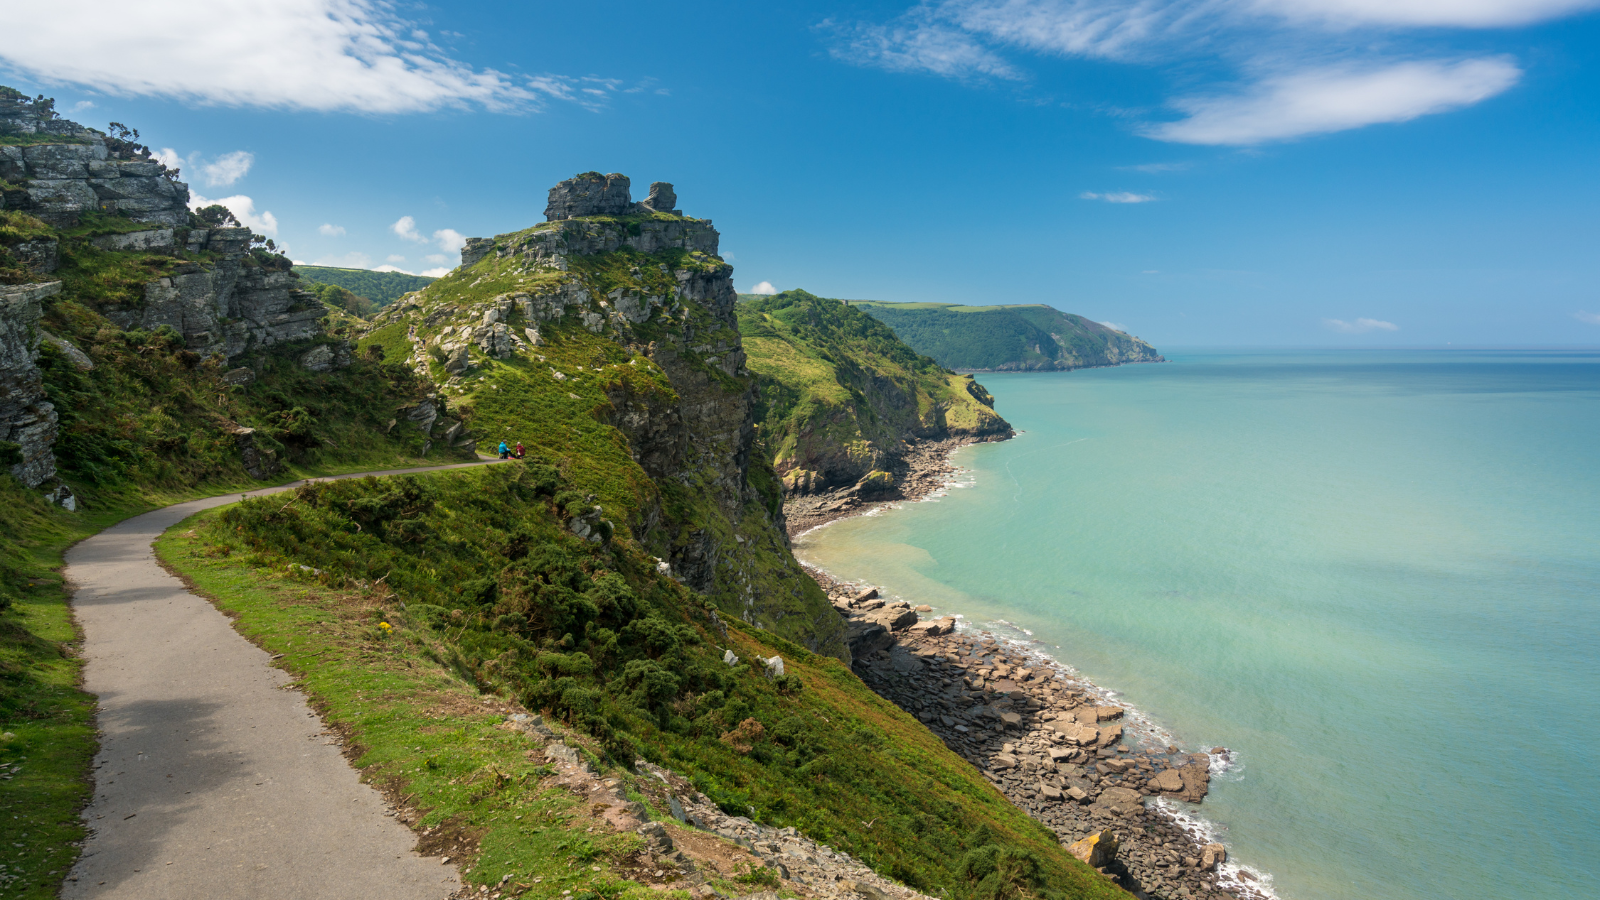 Image shows a rocky outcrop on a cliff by the coast in North Devon